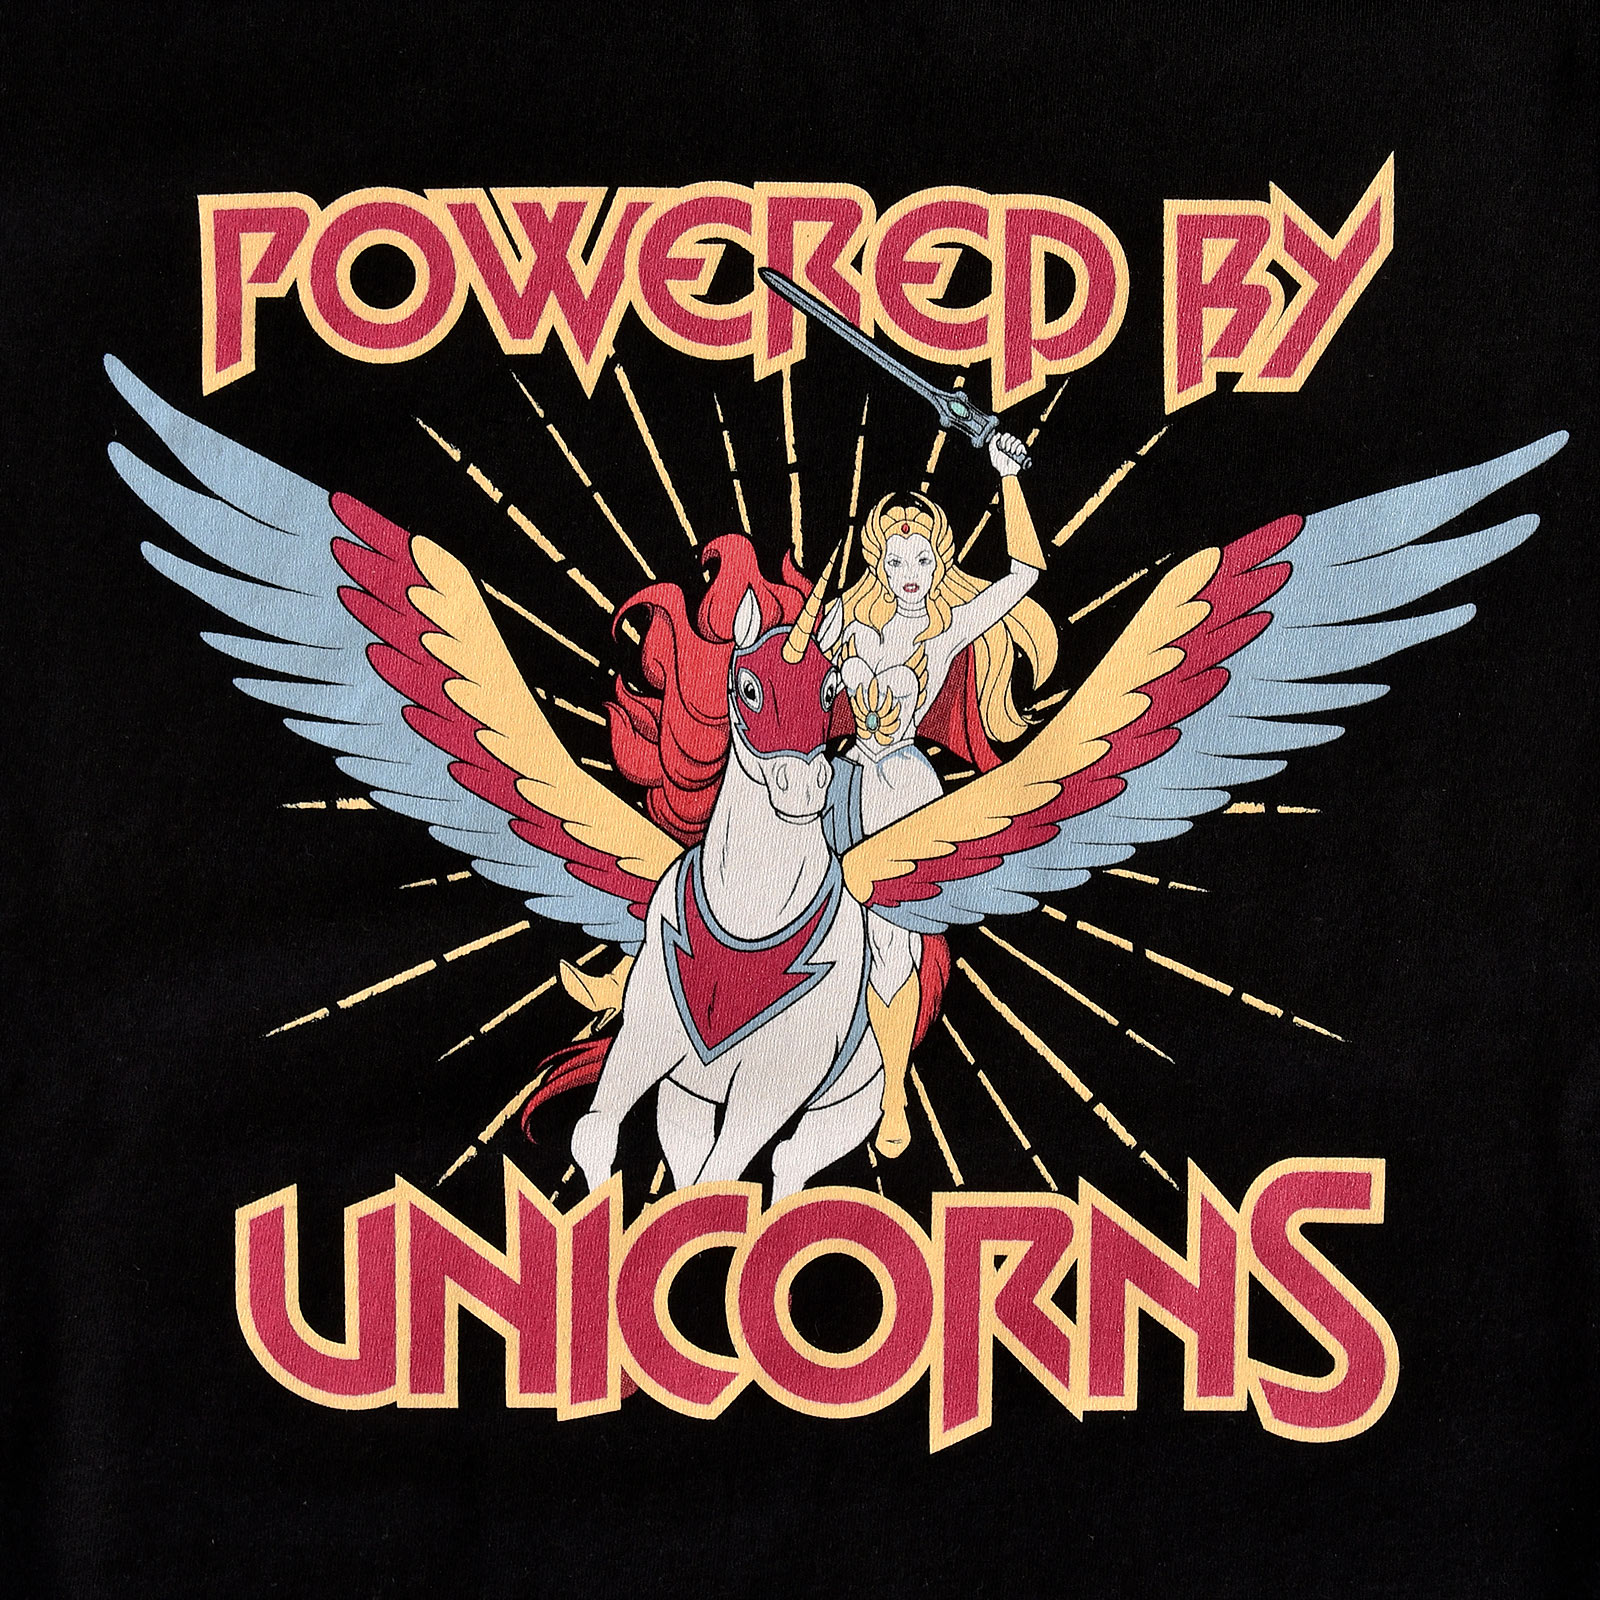 Masters of the Universe - She-Ra Powered by Unicorns Dames T-Shirt